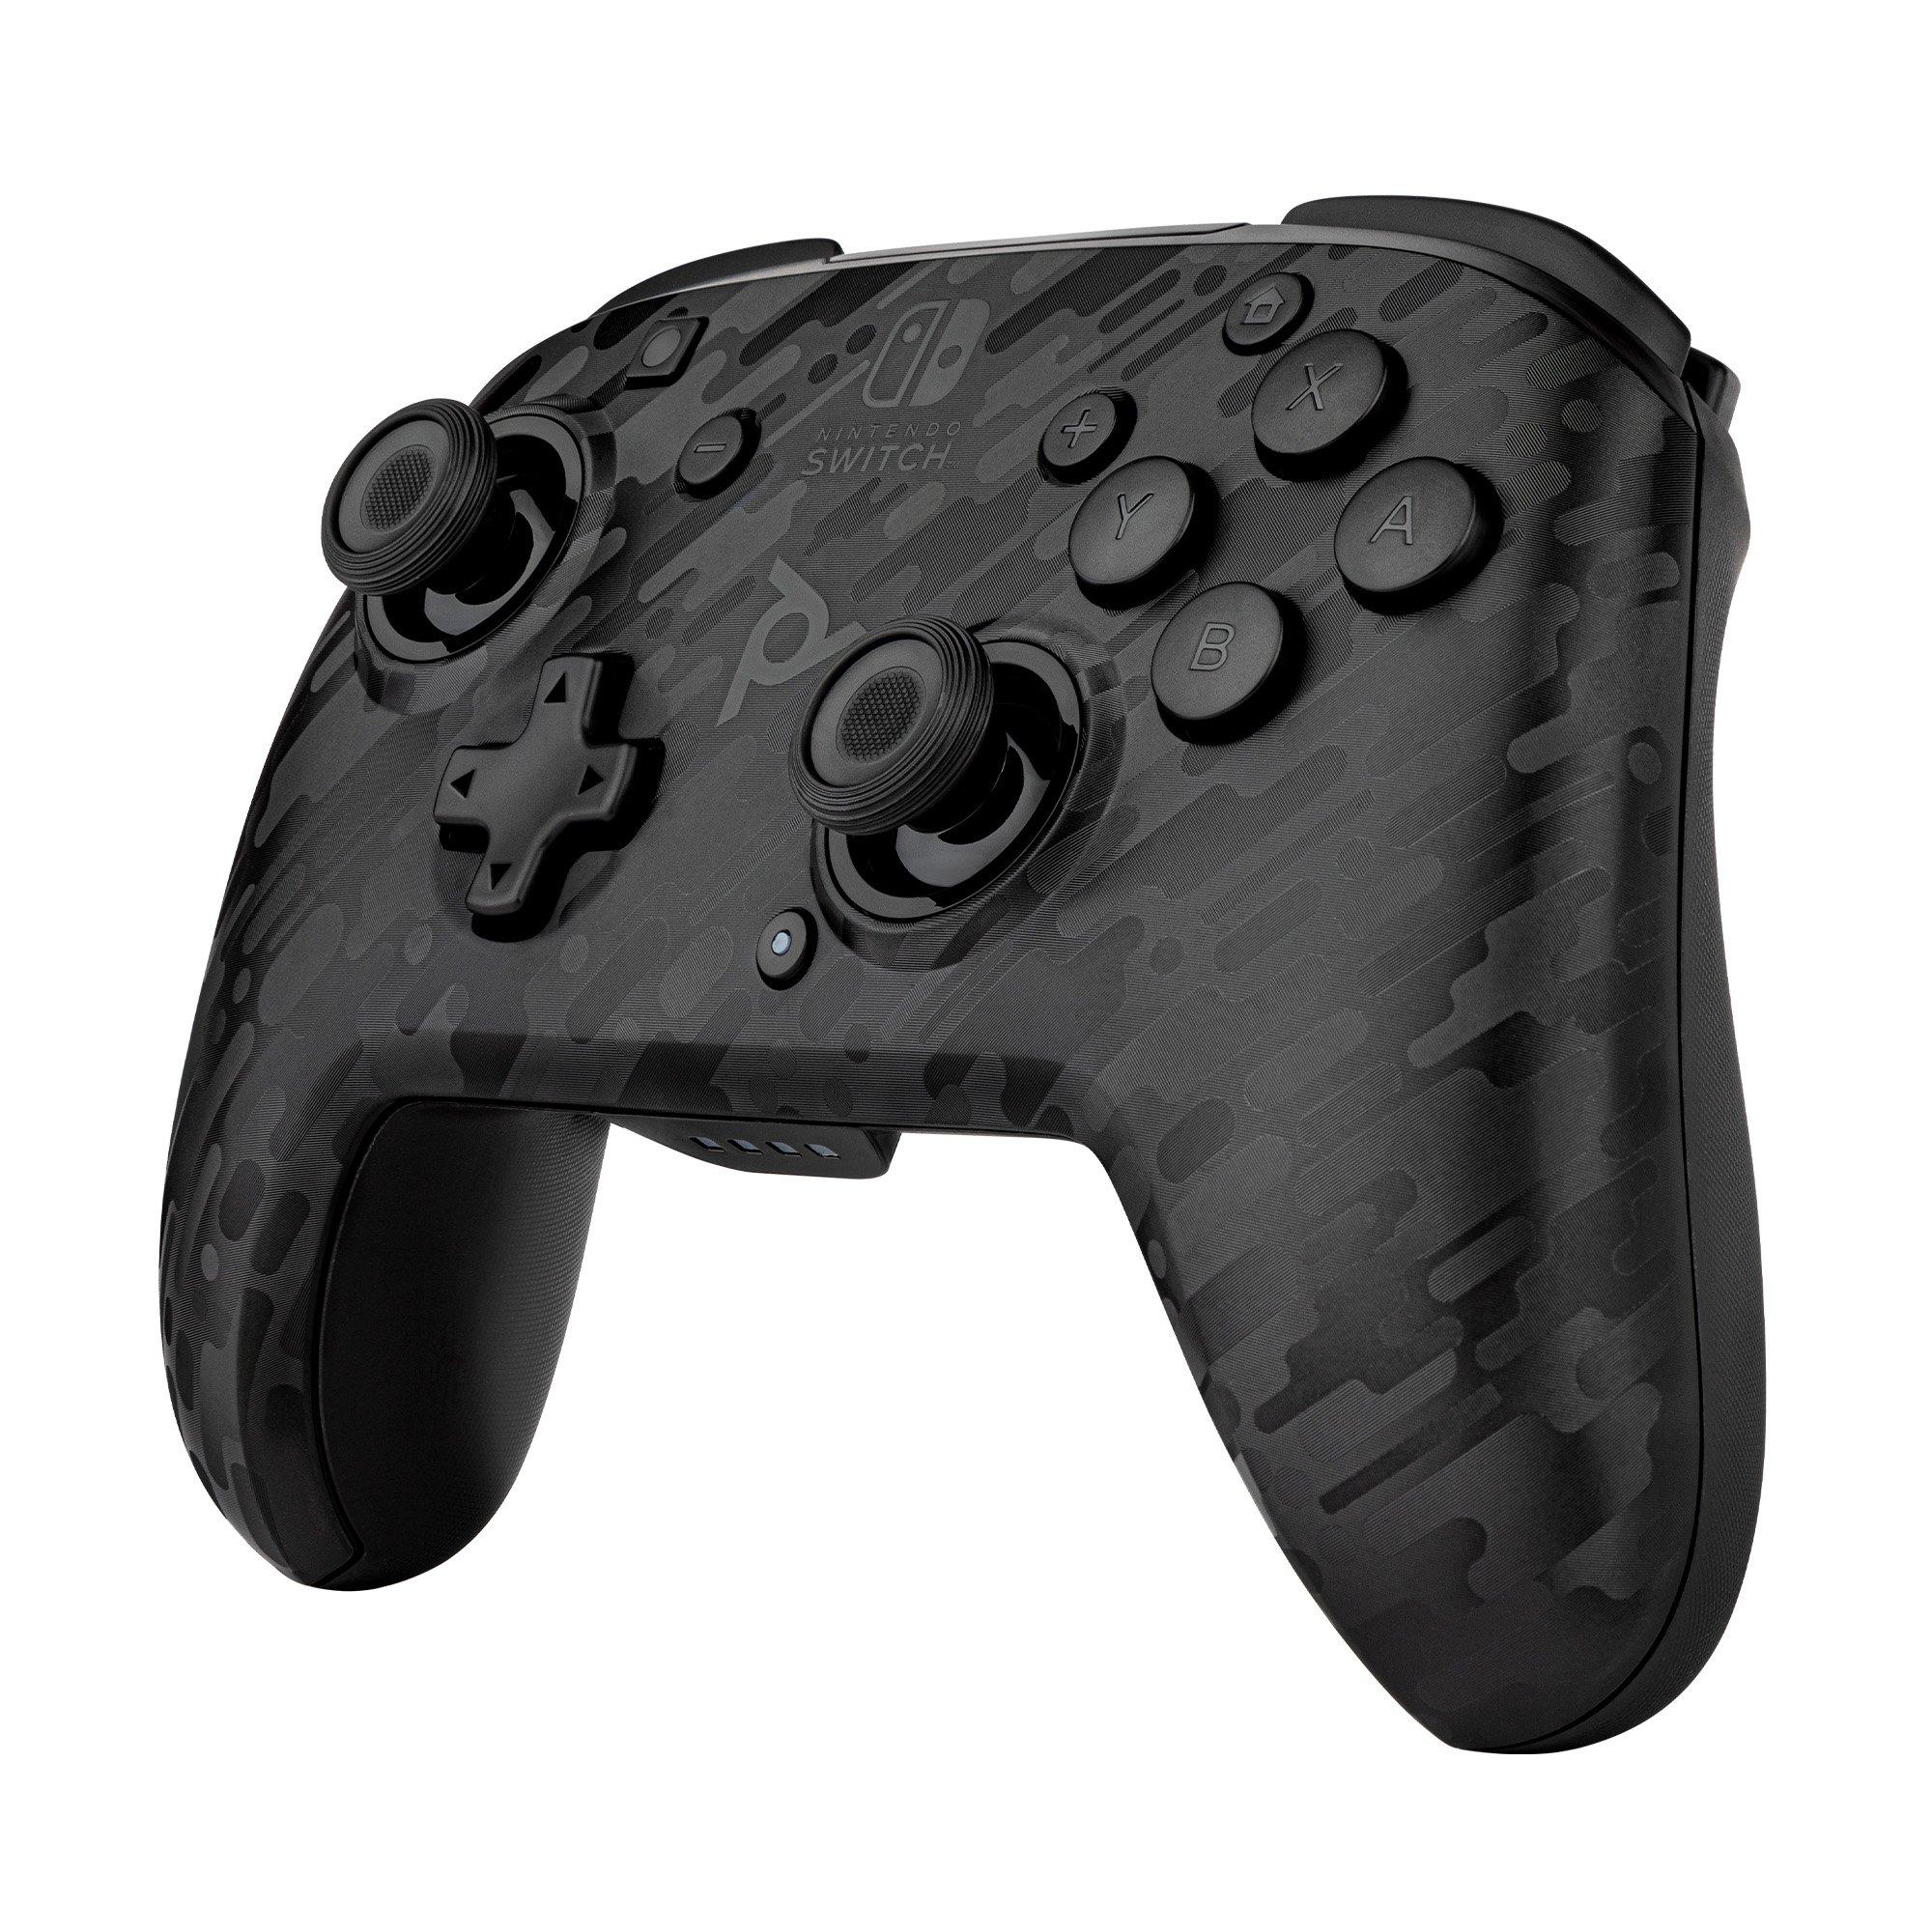 list item 8 of 10 Faceoff Black Camo Wireless Deluxe Controller for Nintendo Switch